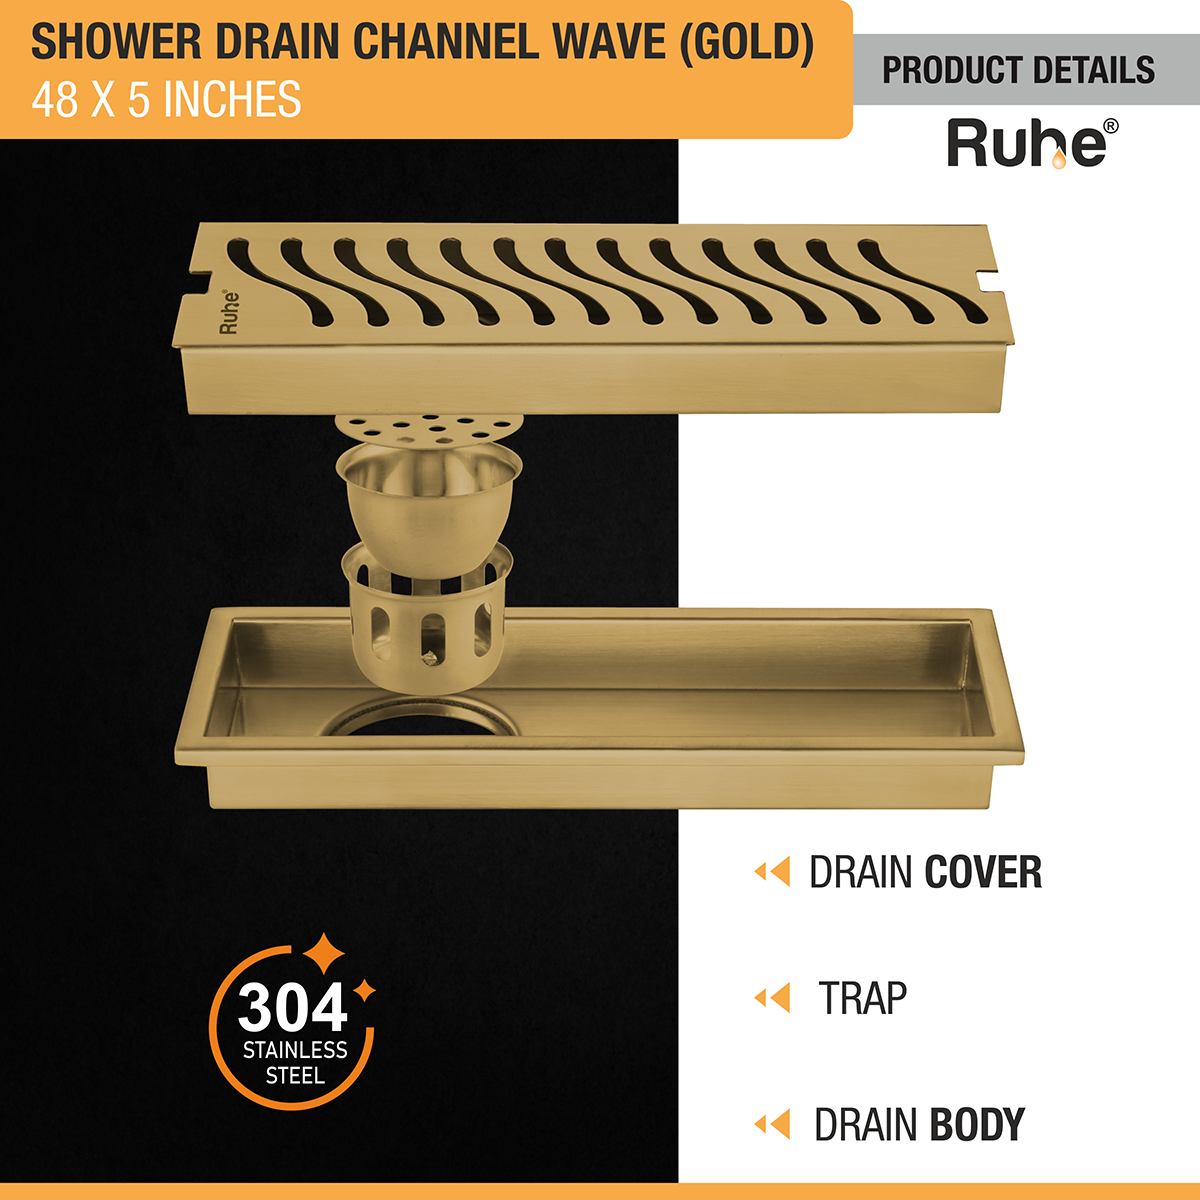 Wave Shower Drain Channel (48 x 5 Inches) YELLOW GOLD product details